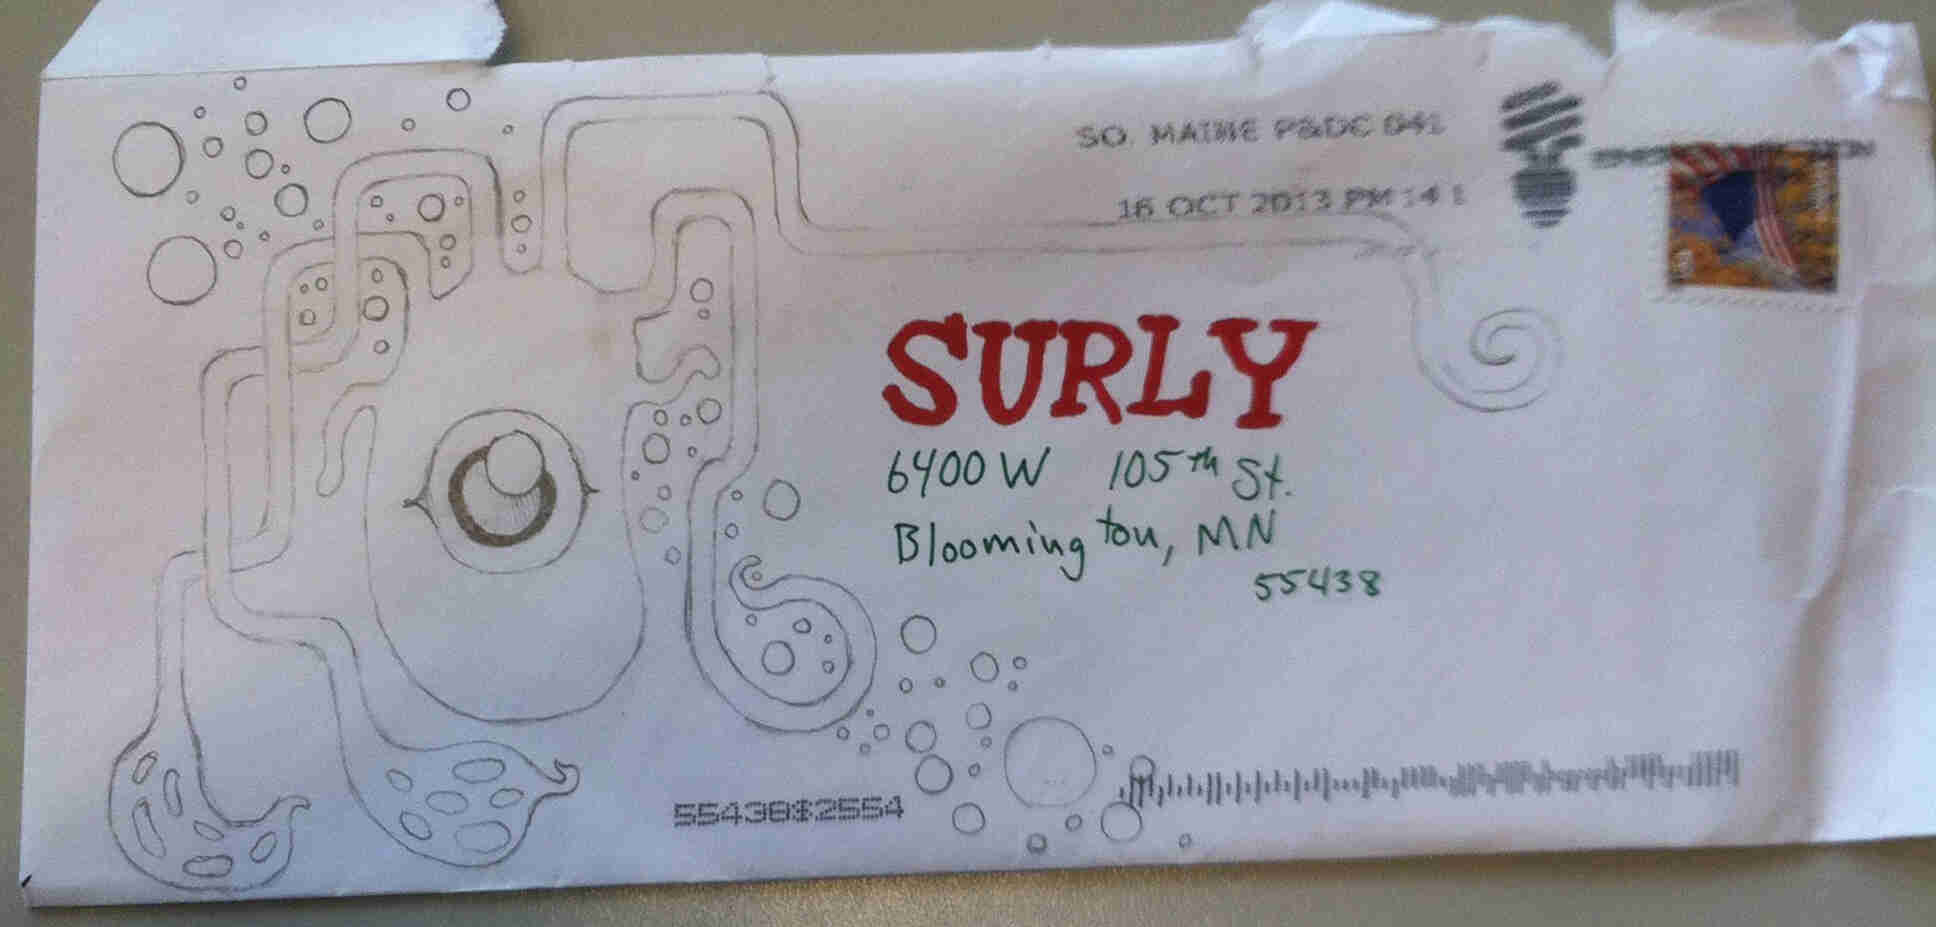 Downward view of a white envelope on a table, addressed to Surly in red marker, with a pen drawing of a squid creature